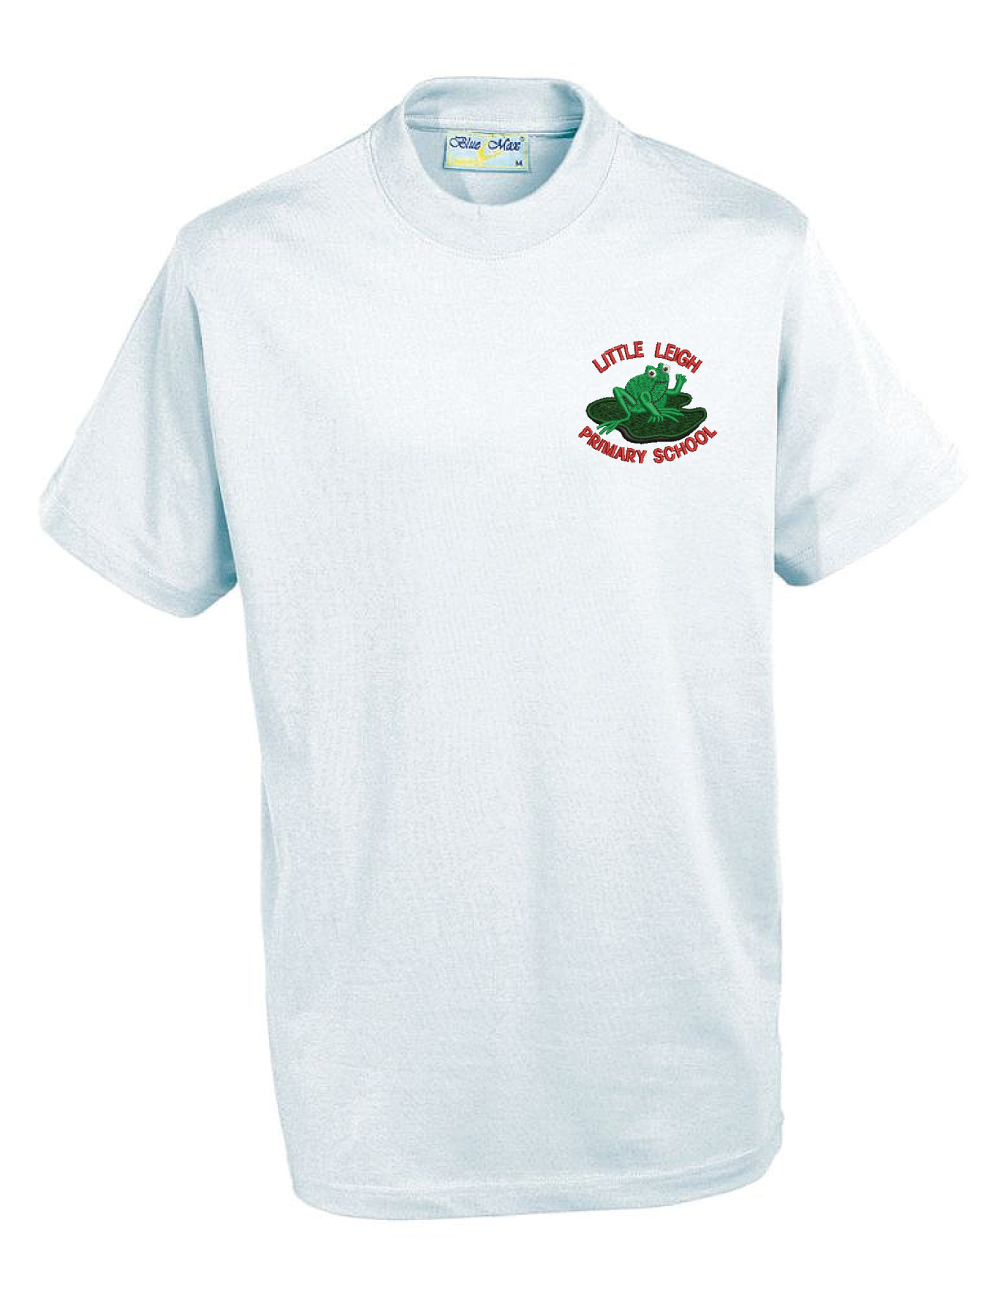 Little Leigh Primary School PE T Shirt